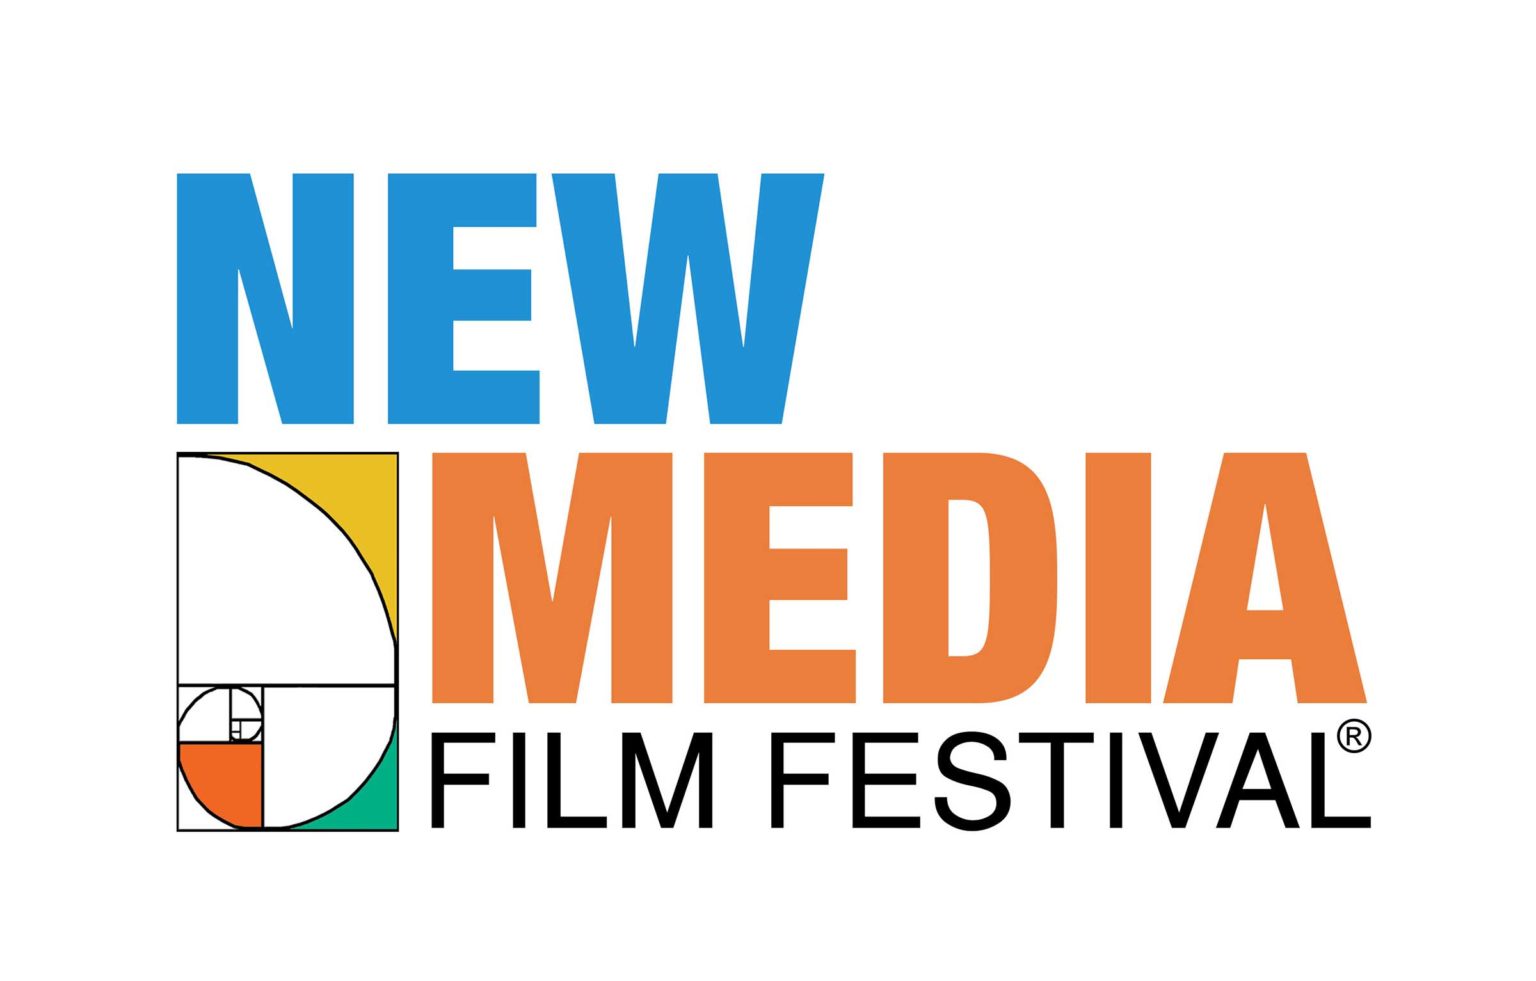 In its 11th year, the New Media Film Festival continues to show the best of innovation in filmmaking techniques. Here's why you should join in on the fun.